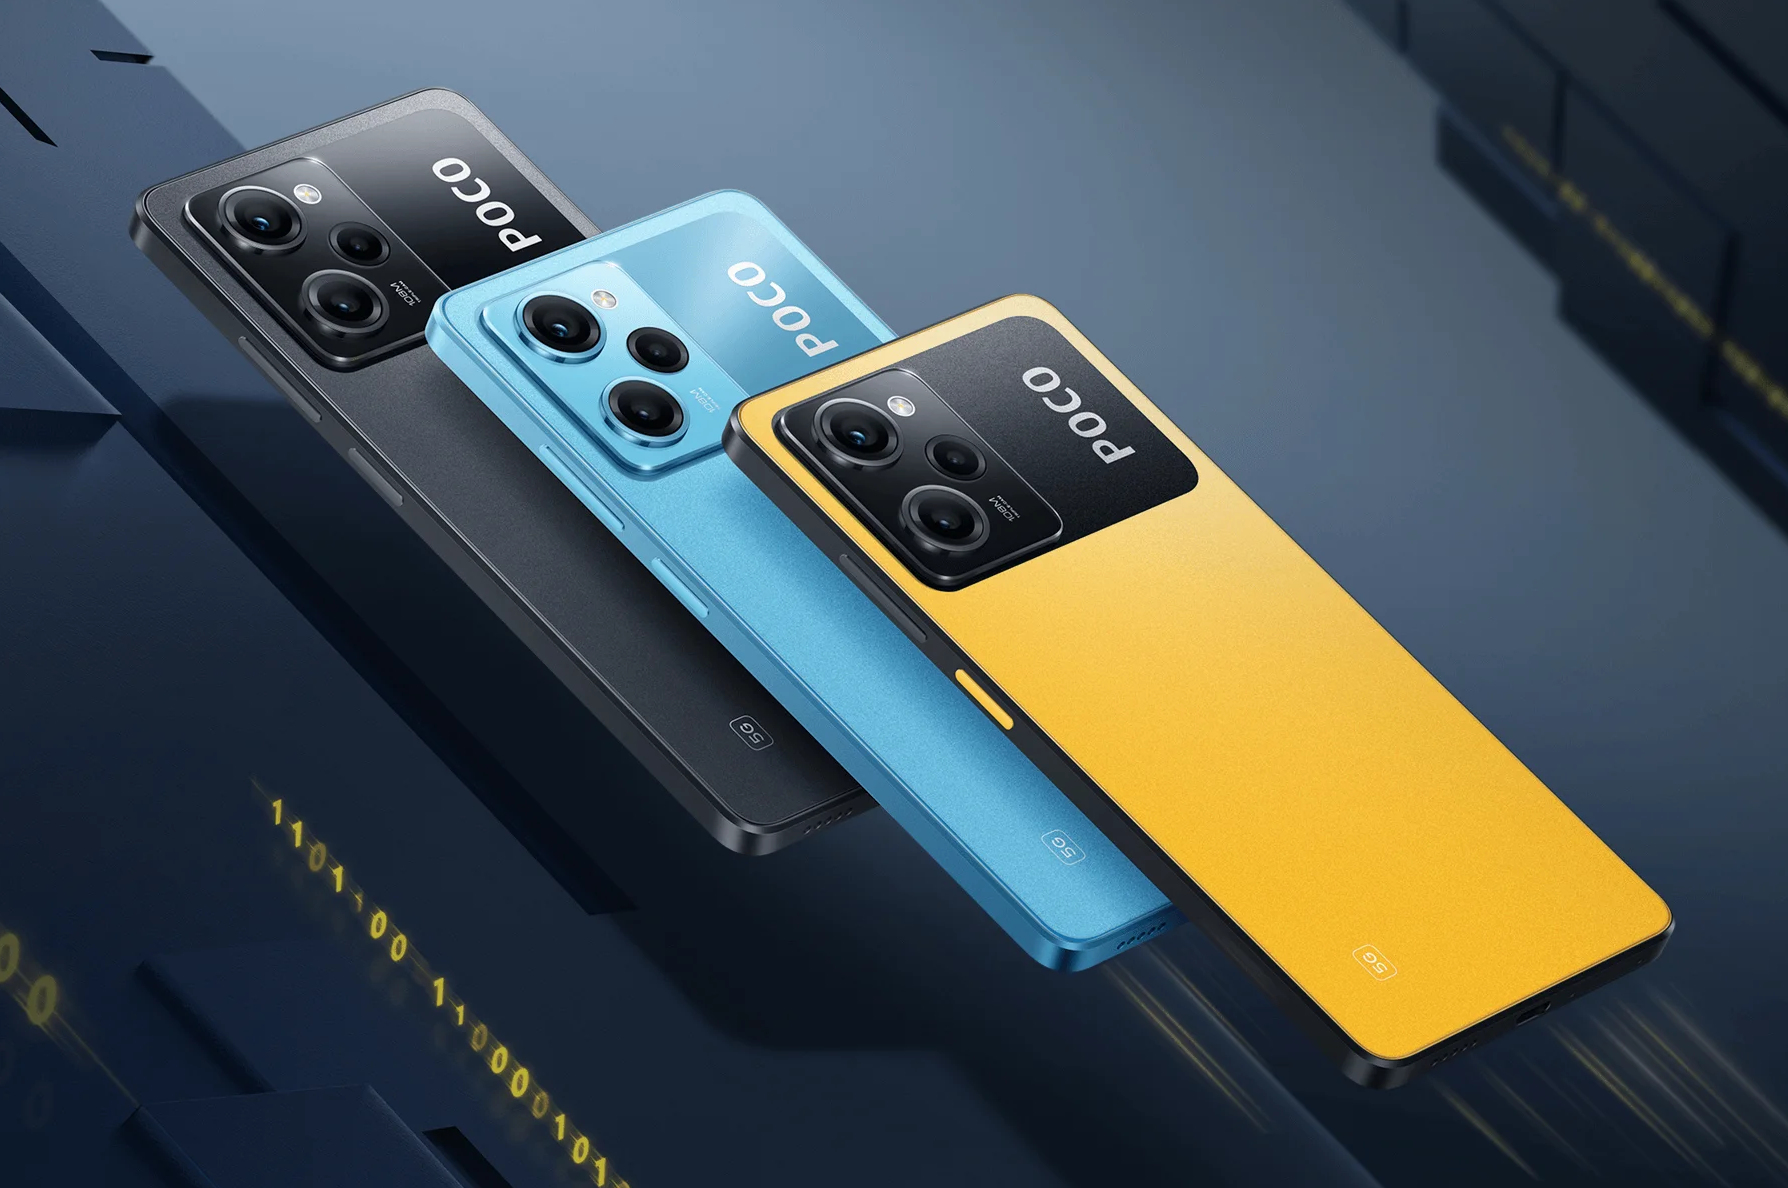 Poco C65 launched in India, sales begin December 18 -  news